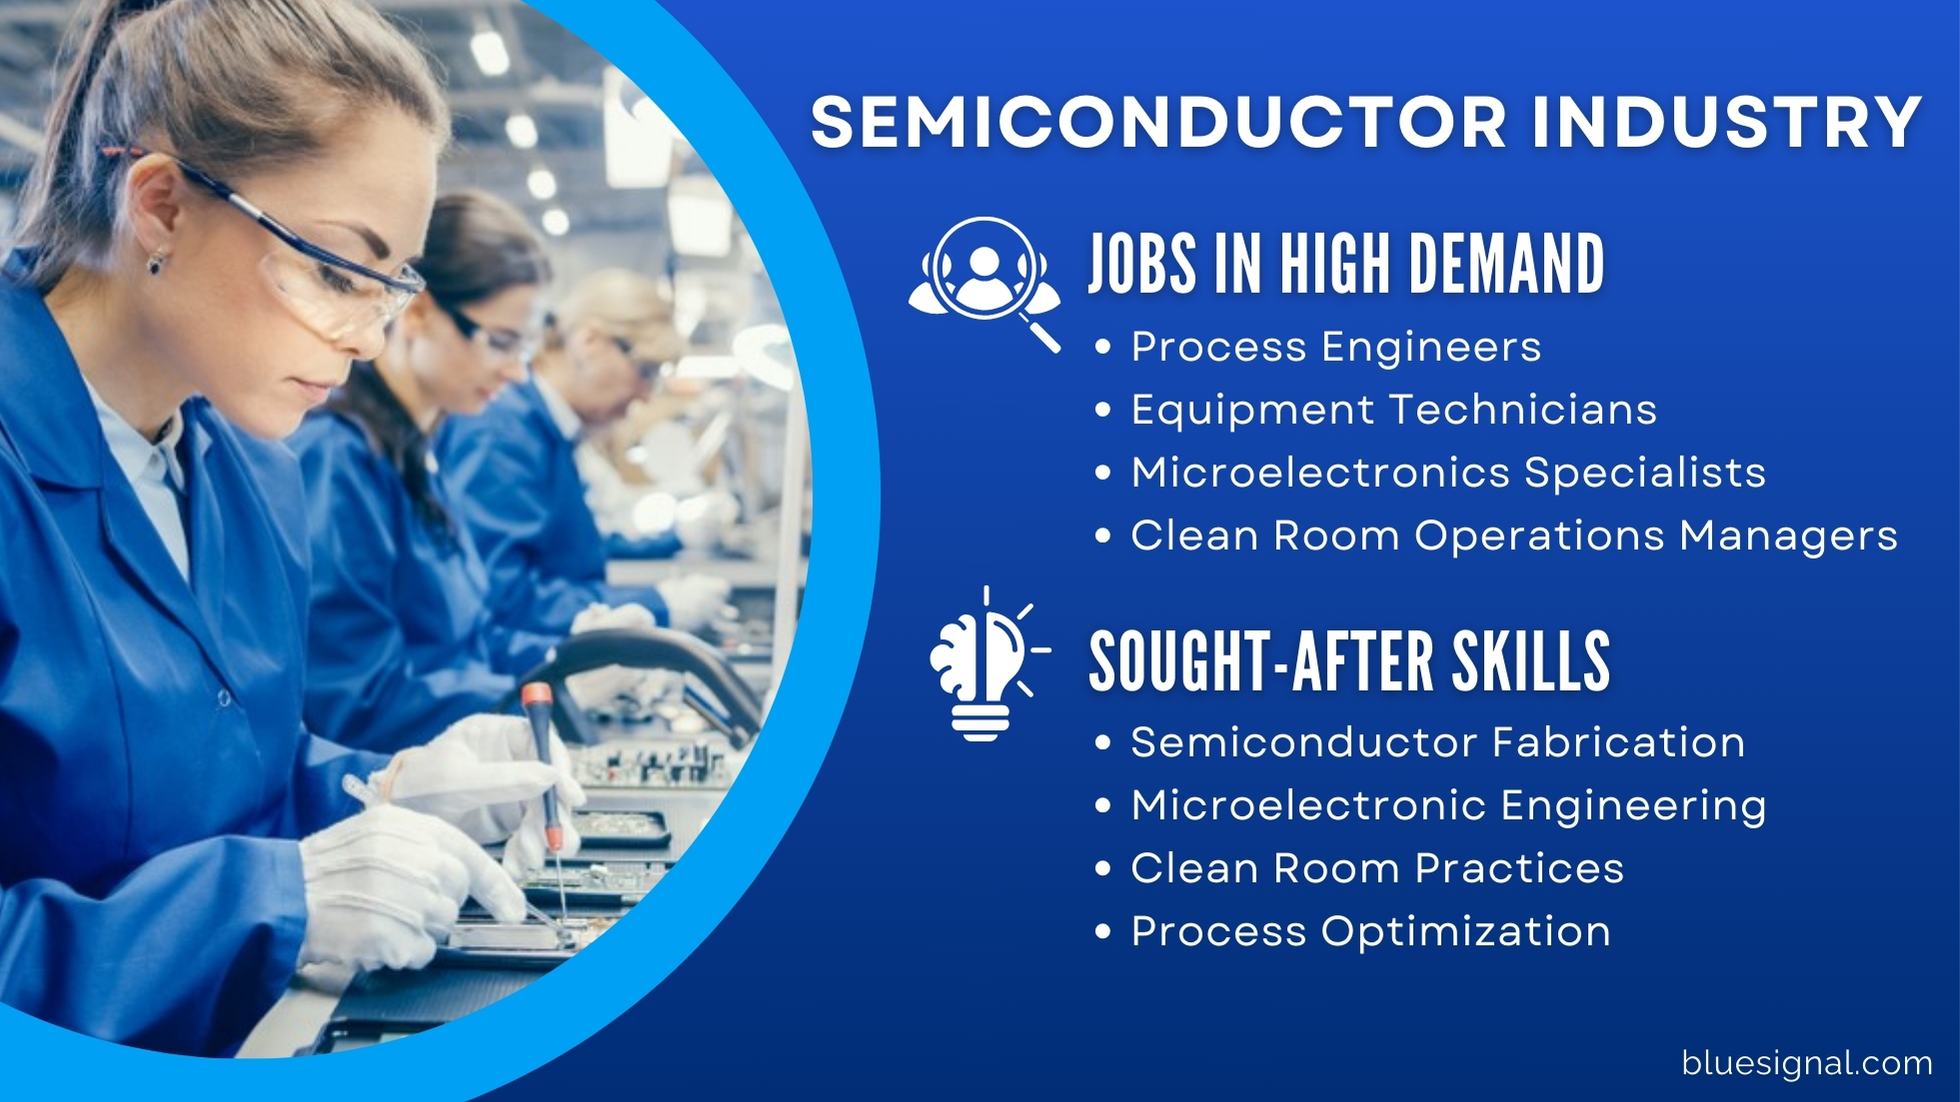 Technicians working meticulously in the semiconductor industry with a list of in-demand jobs and essential skills.